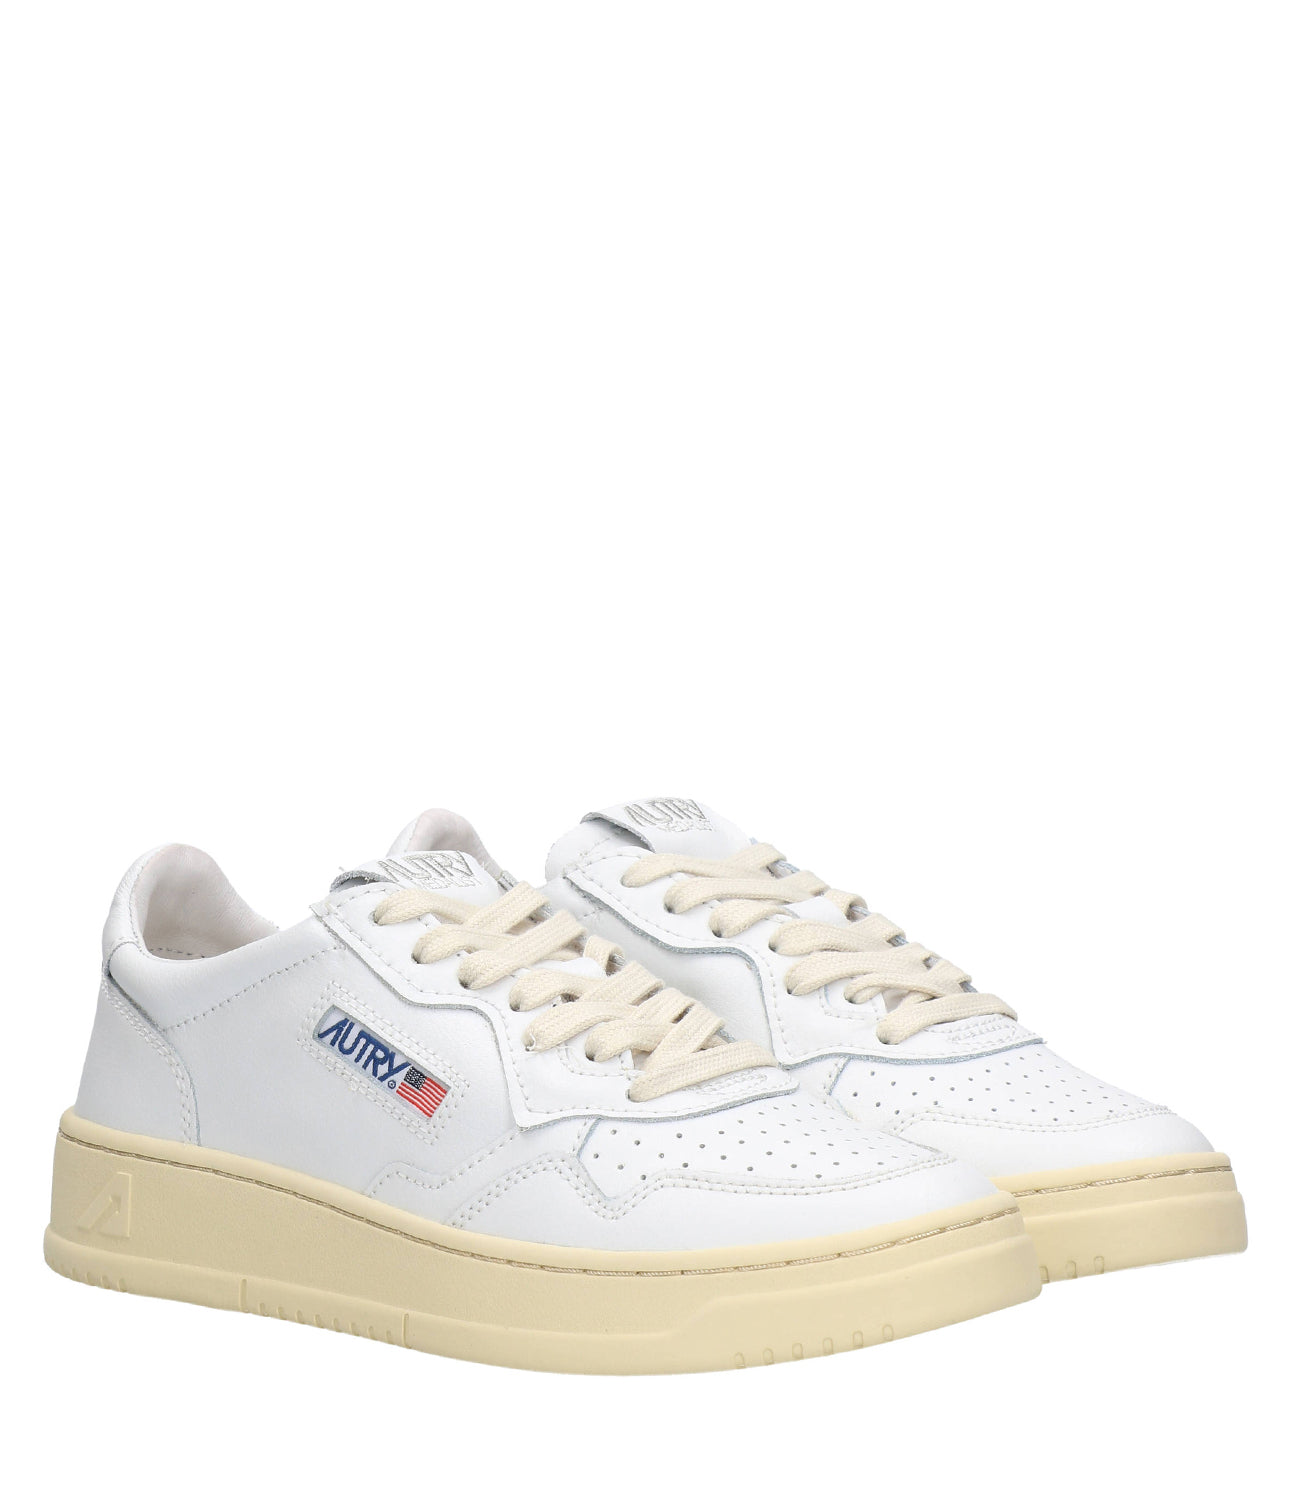 Autry | Sneakers Medalist Low Bianco e Bianco